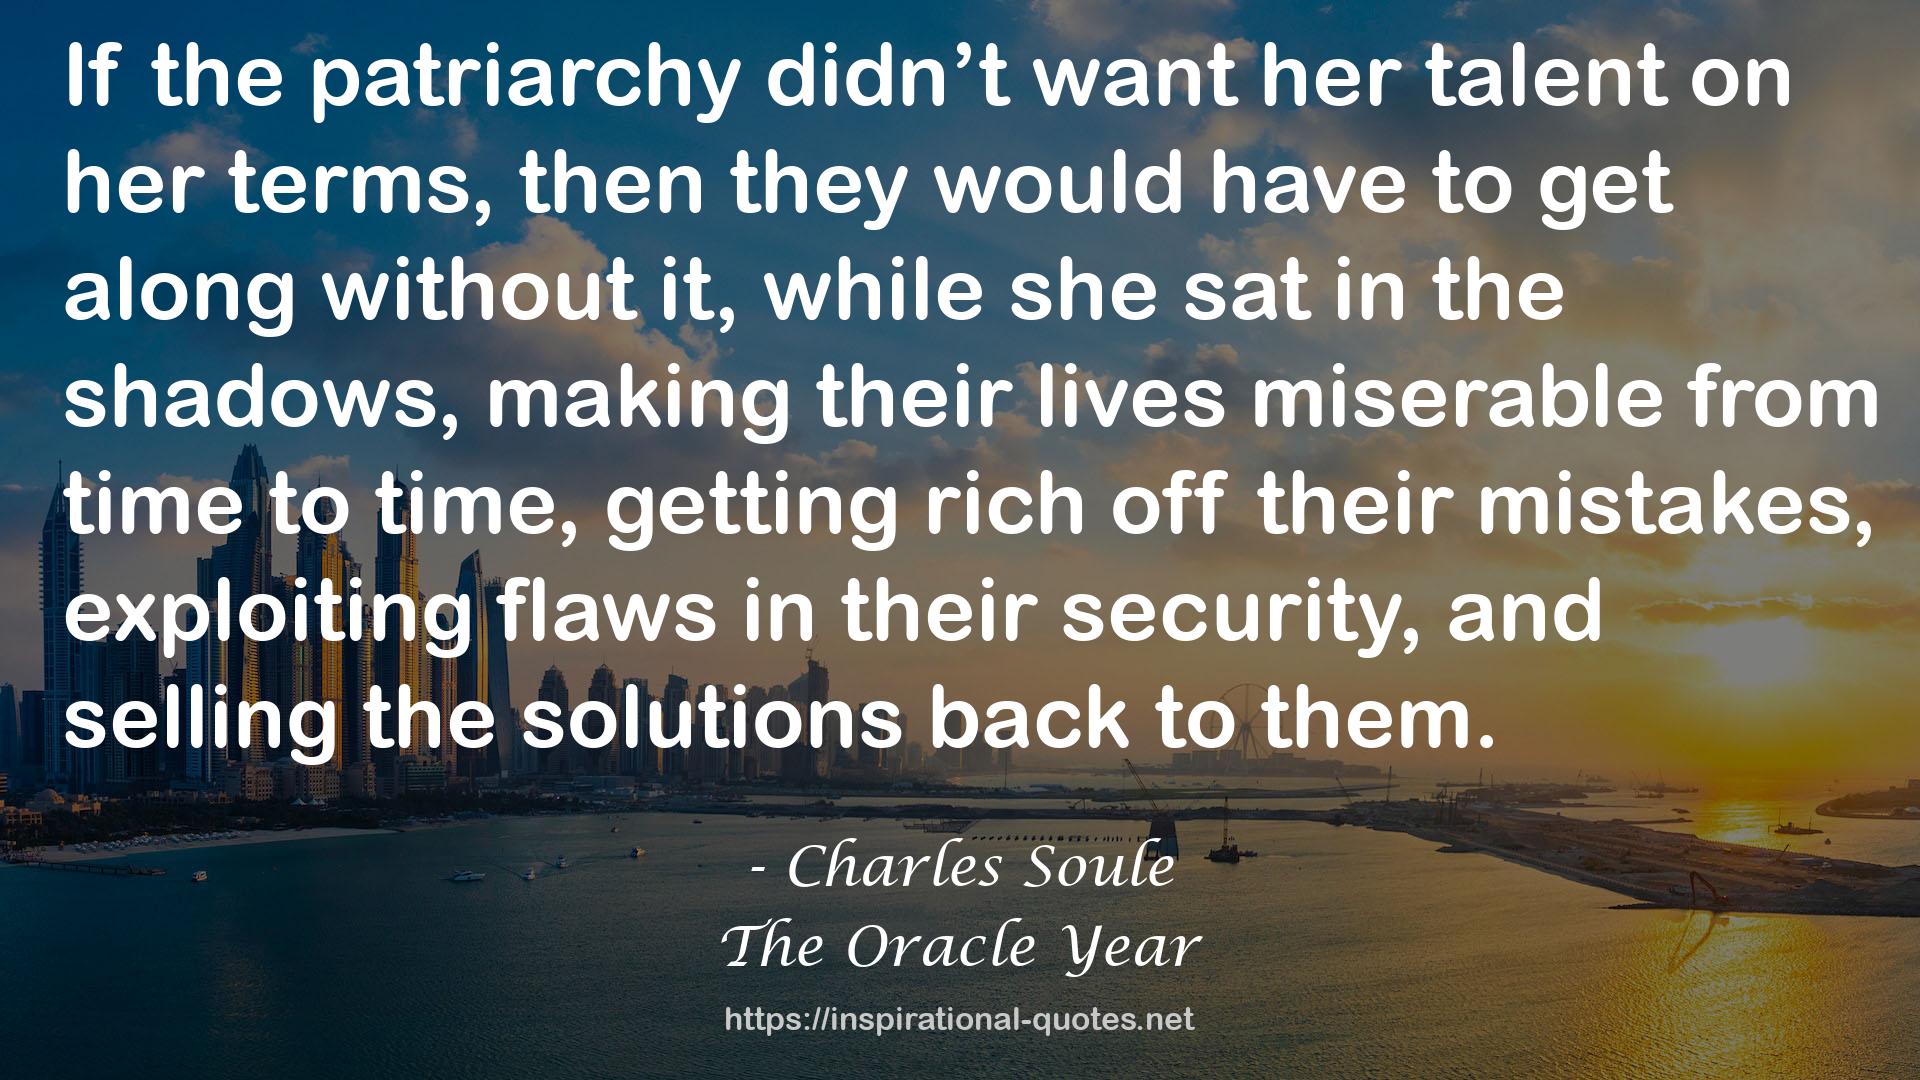 Charles Soule QUOTES